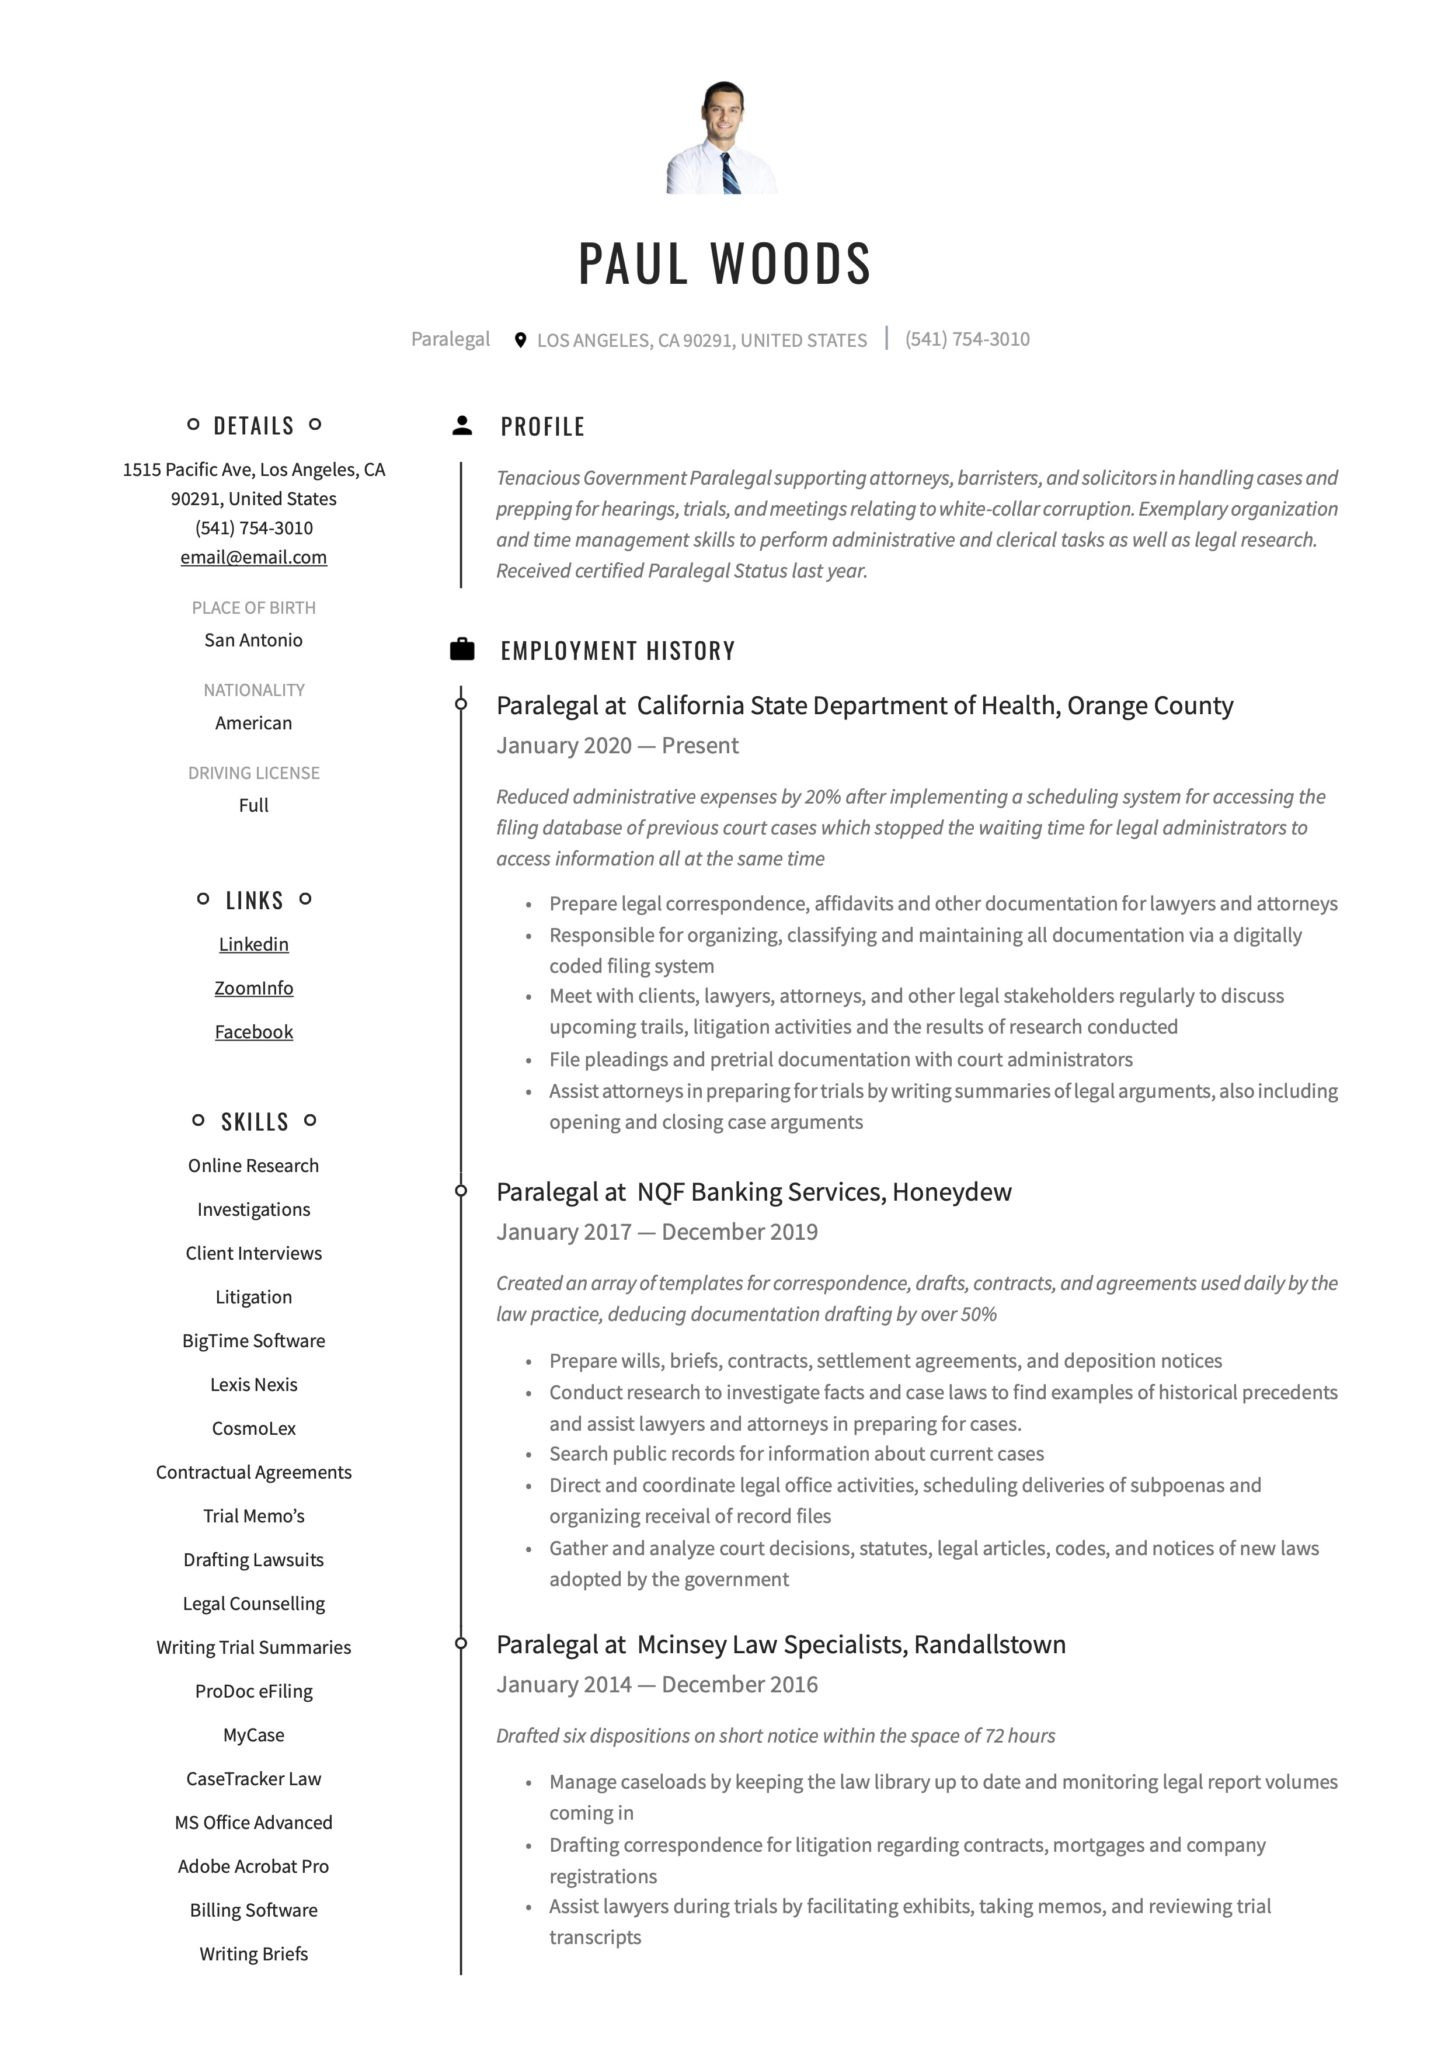 Legal assistants and Paralegal Resume Samples 19 Paralegal Resume Examples & Guide Pdf 2020 Free